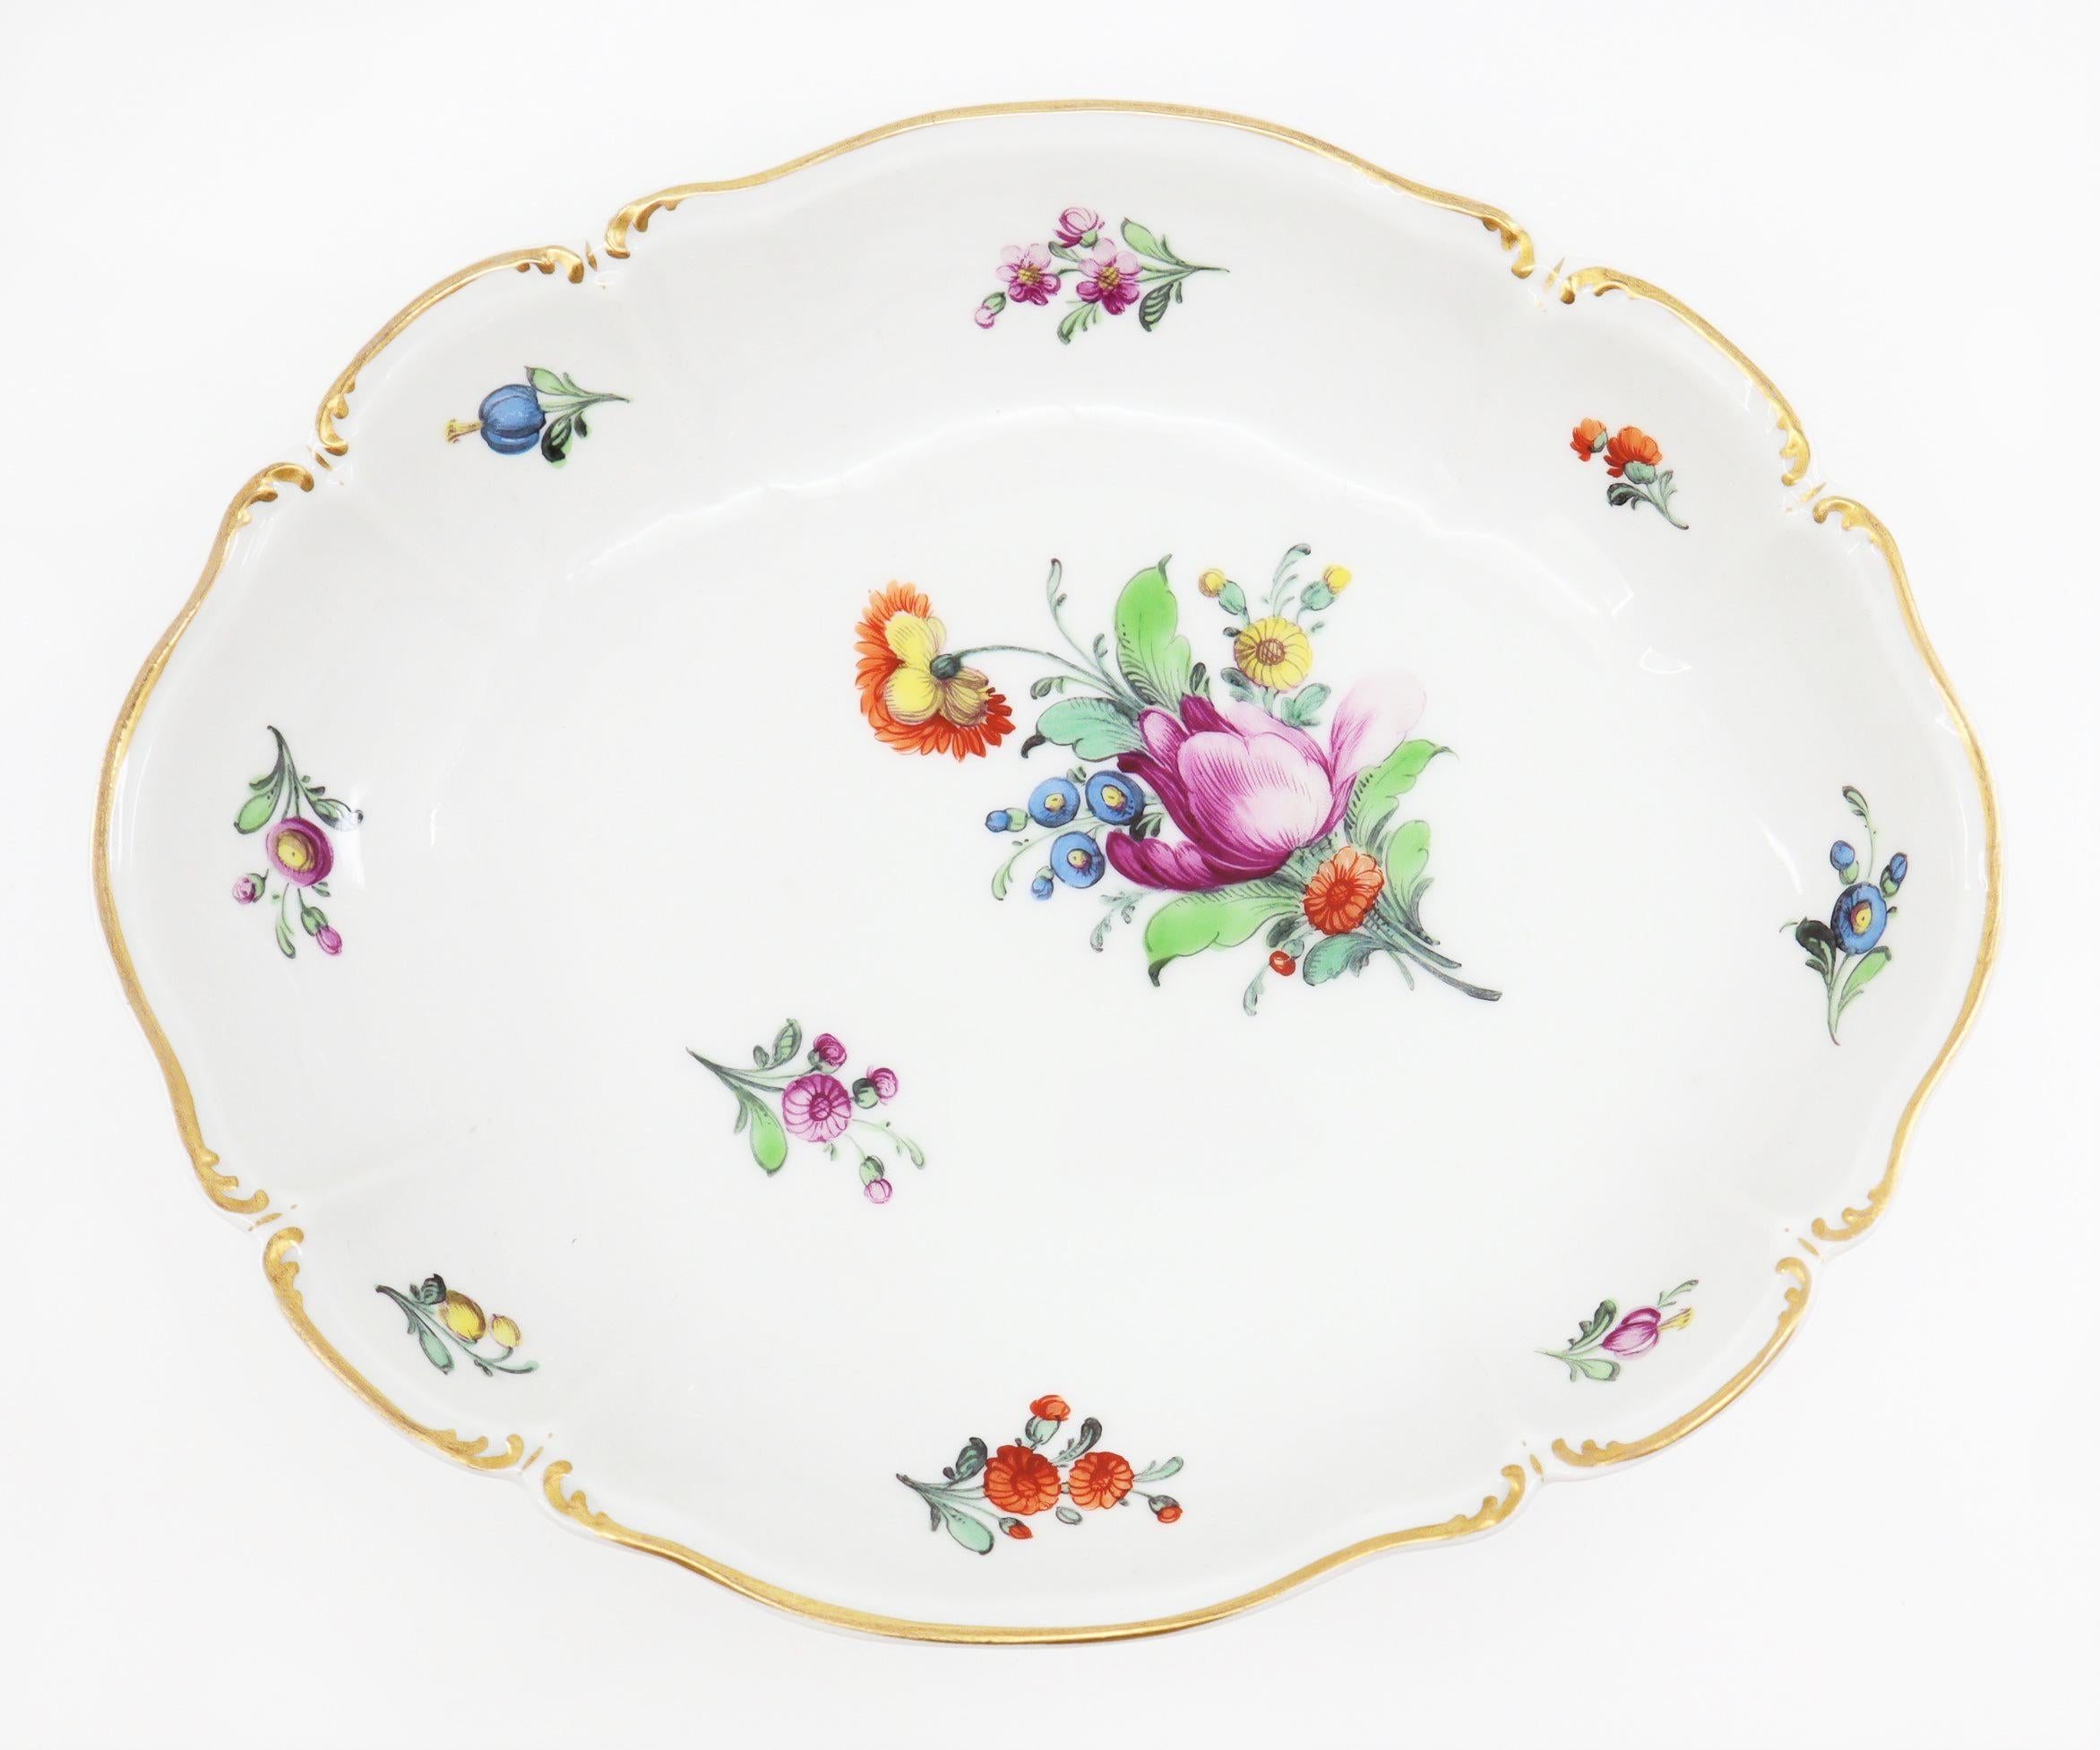 Dinner Service, 19th Century Porcelain, German, Hand Painted with Flowers Décor 4